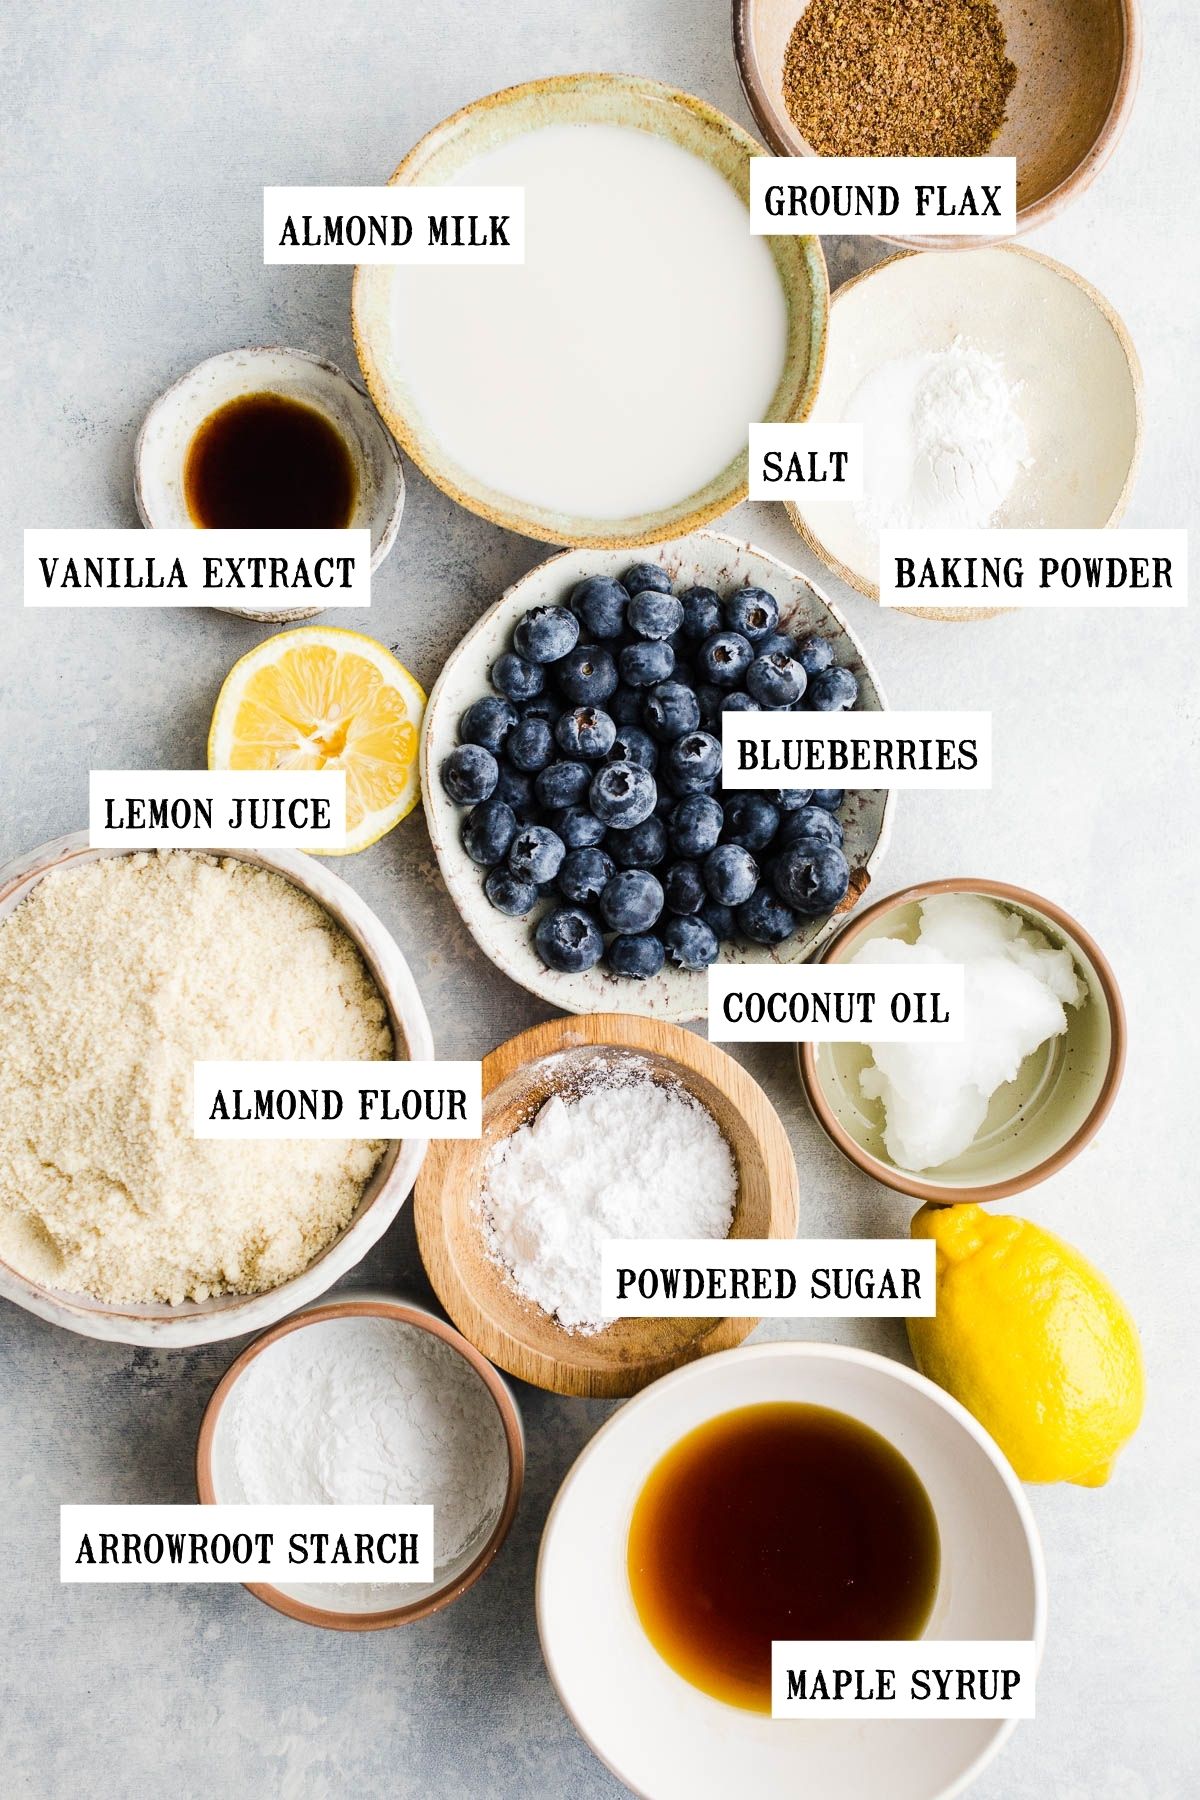 Ingredients to make scones in small separate bowls.